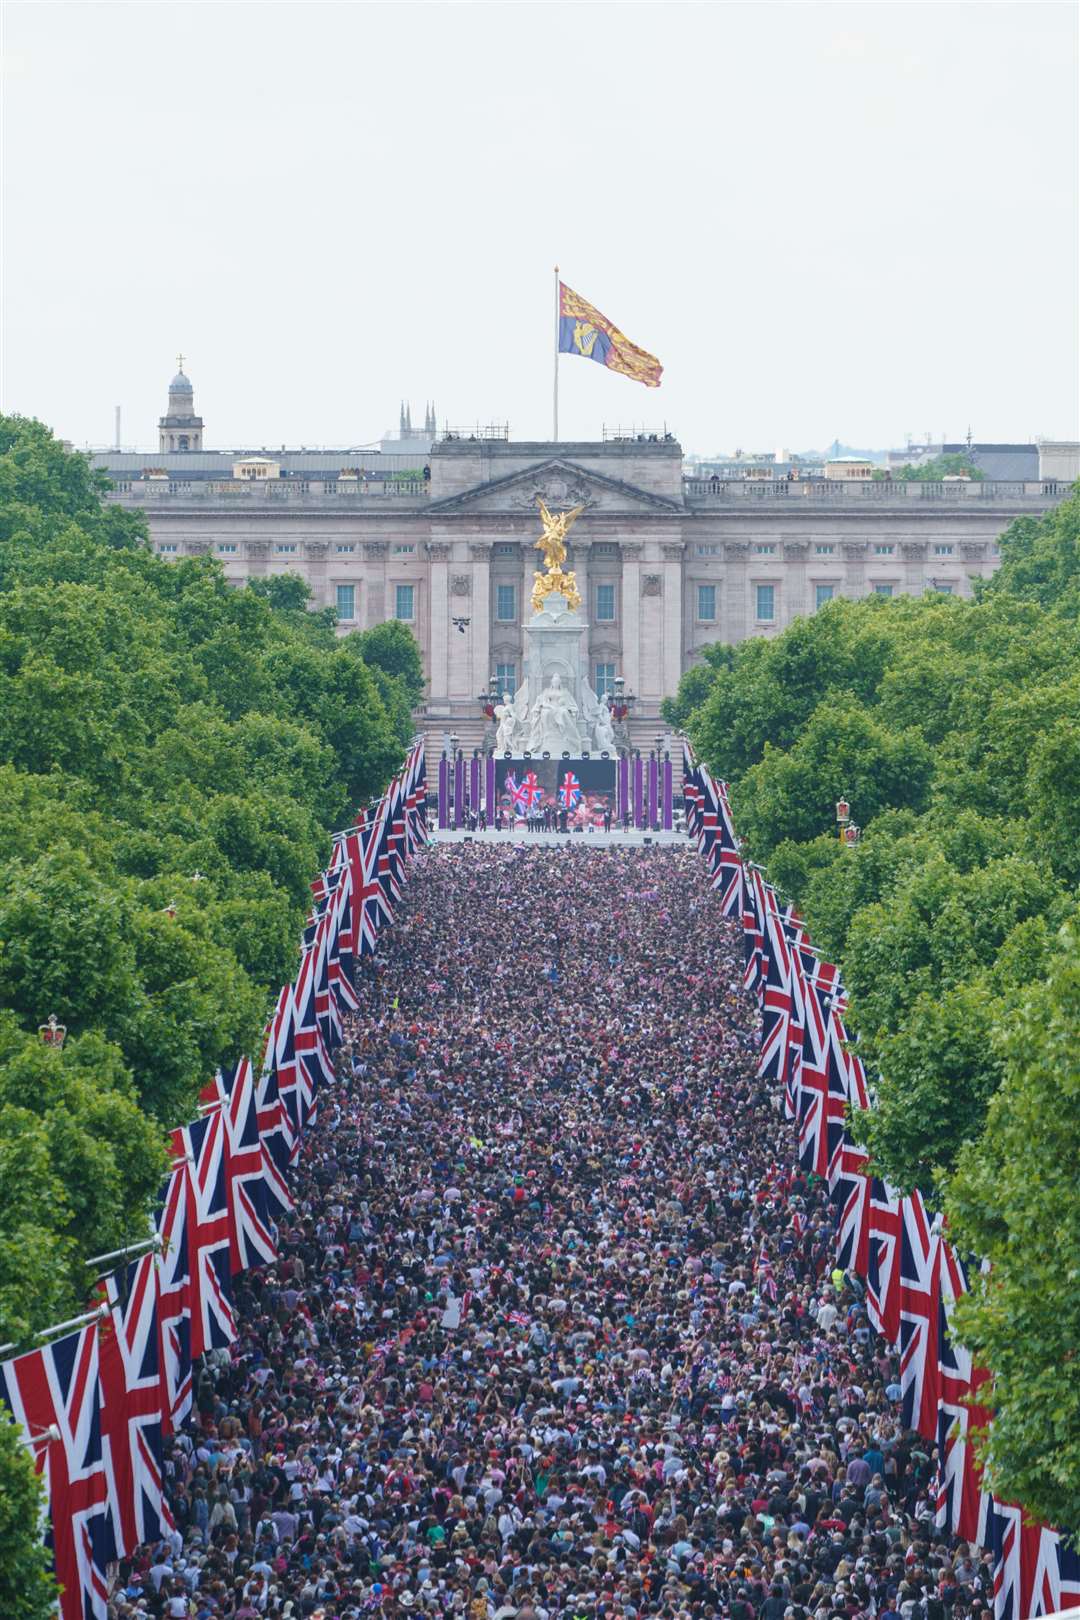 Crowds on the Mall leading to Buckingham Palace on Thursday (Dominic Lipinski/PA)